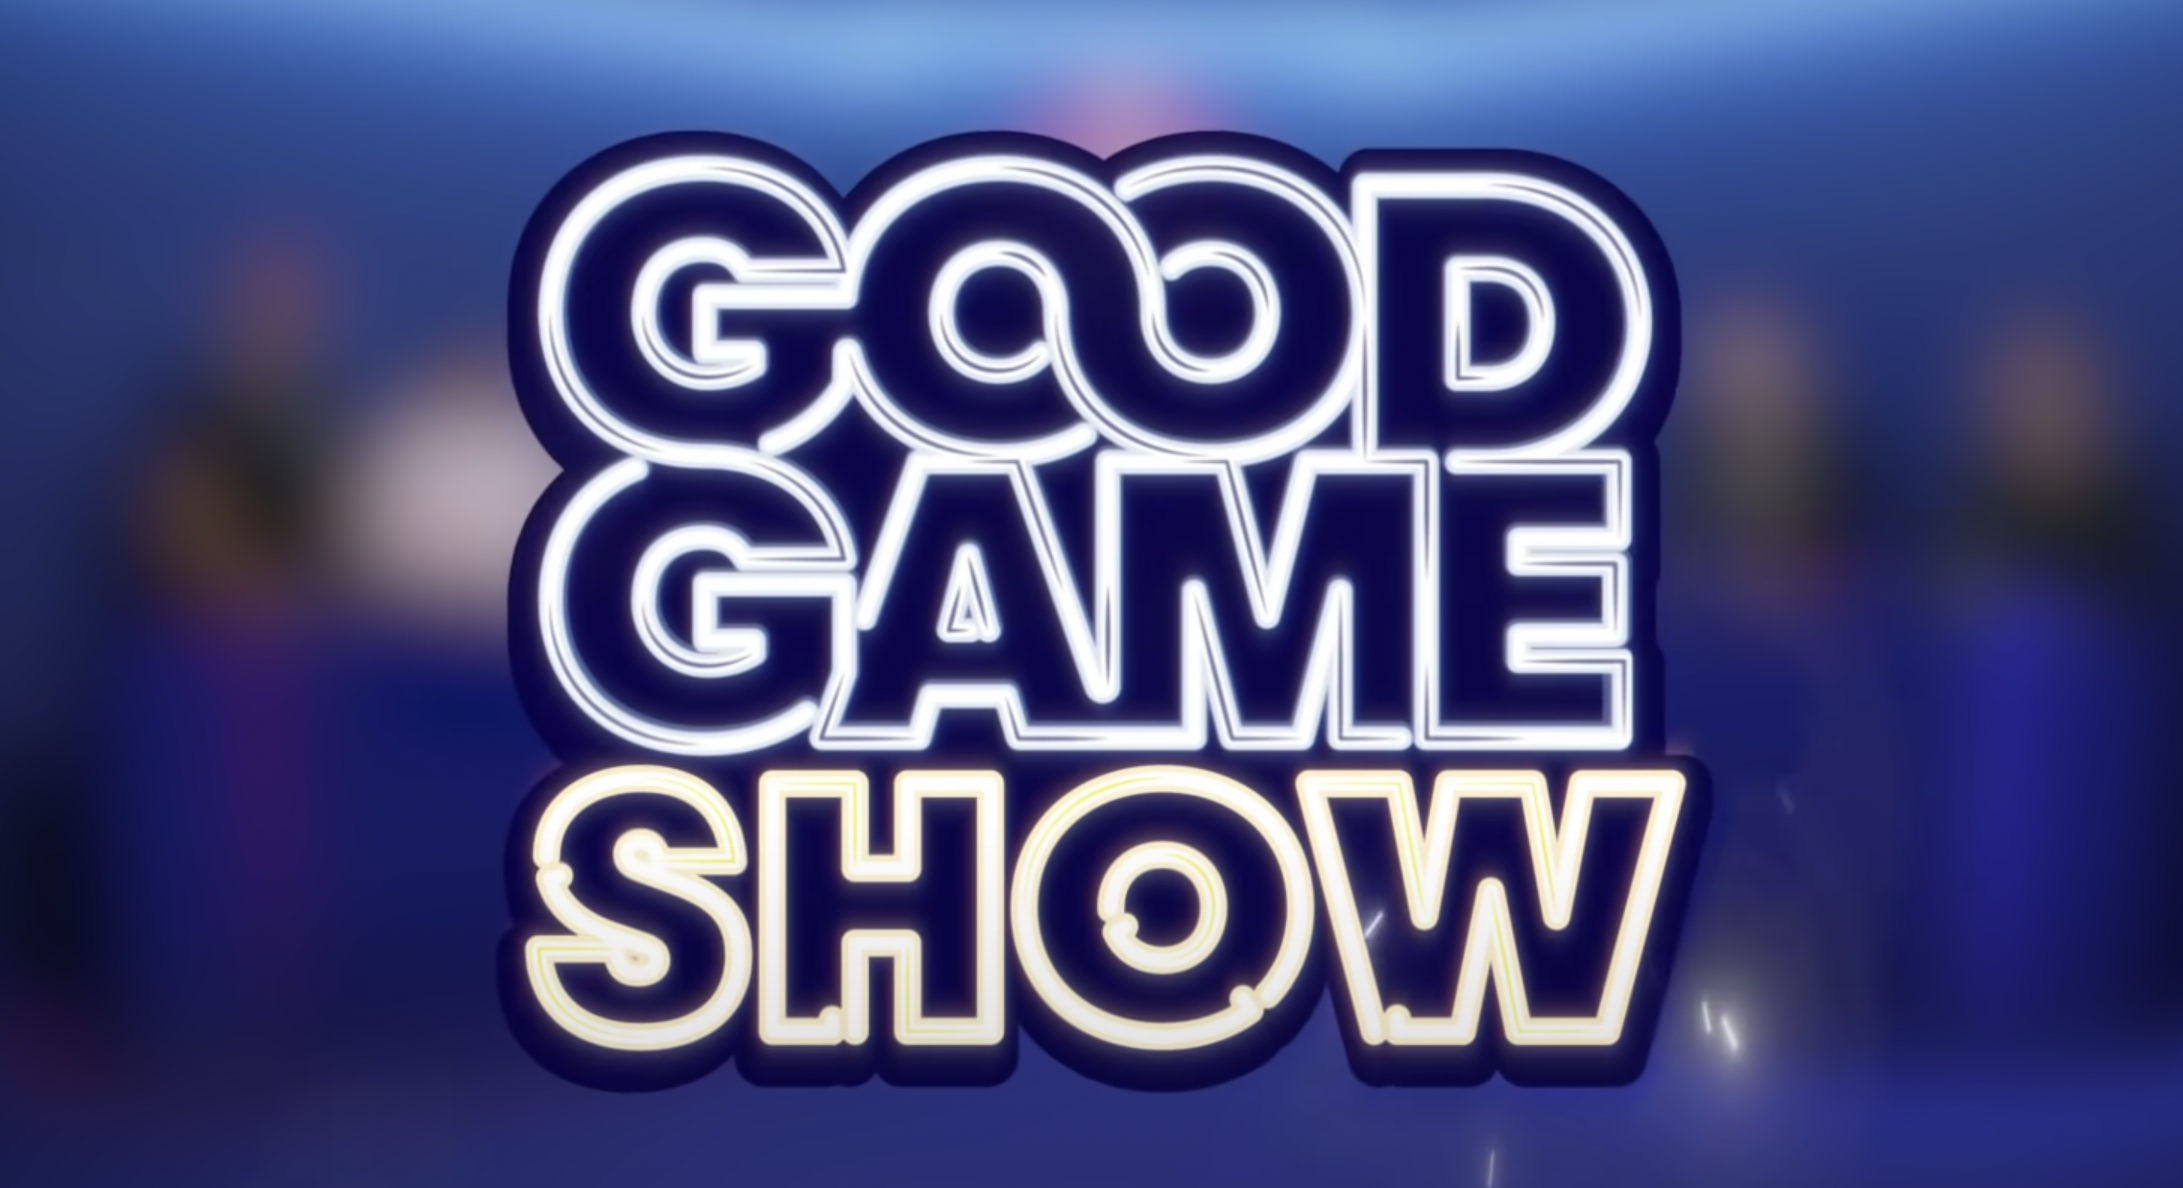 Good Game Show